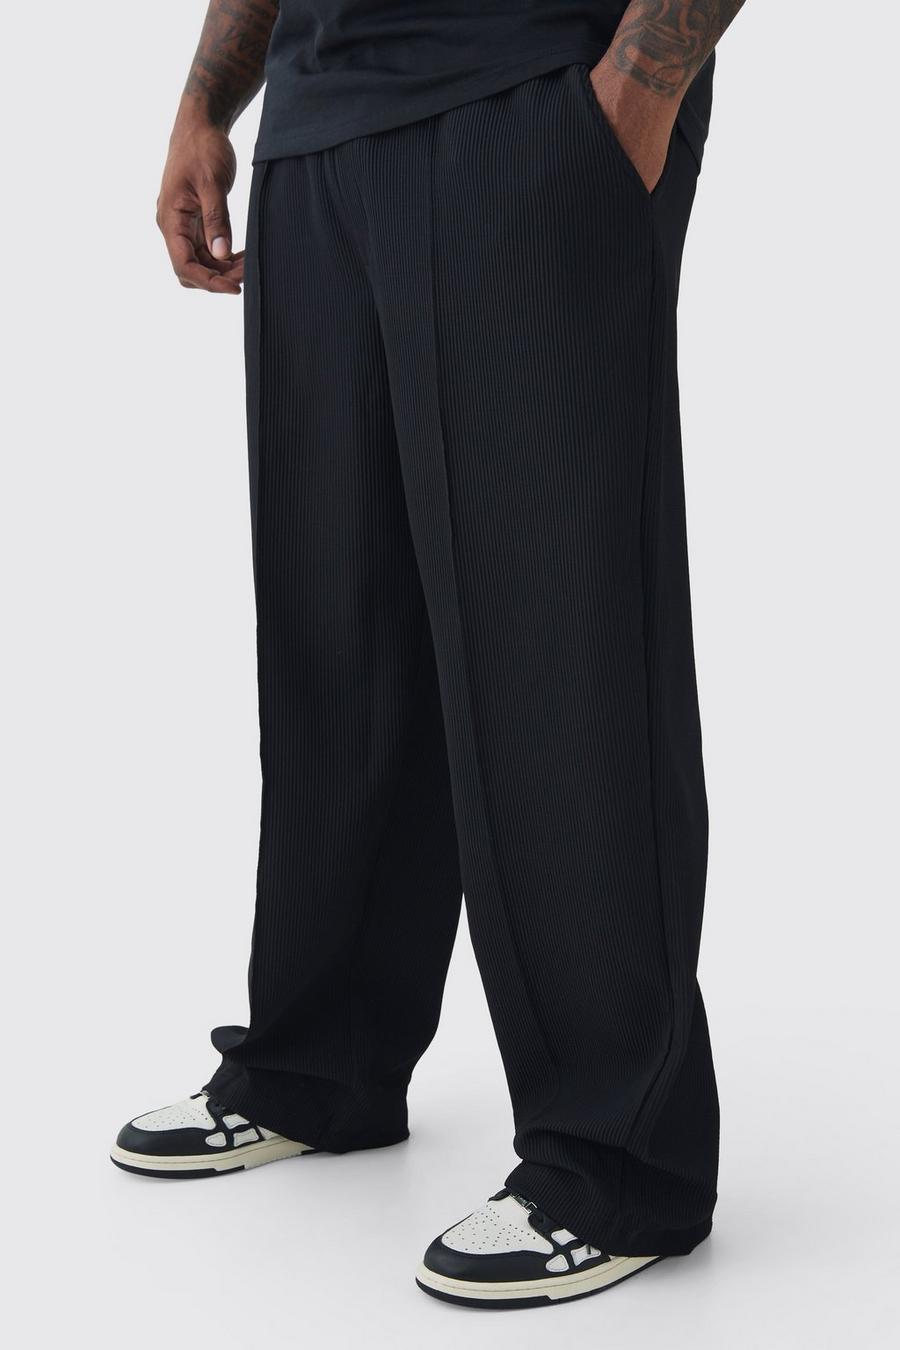 Black Plus Elastic Waist Relaxed Fit Pleated Pants image number 1